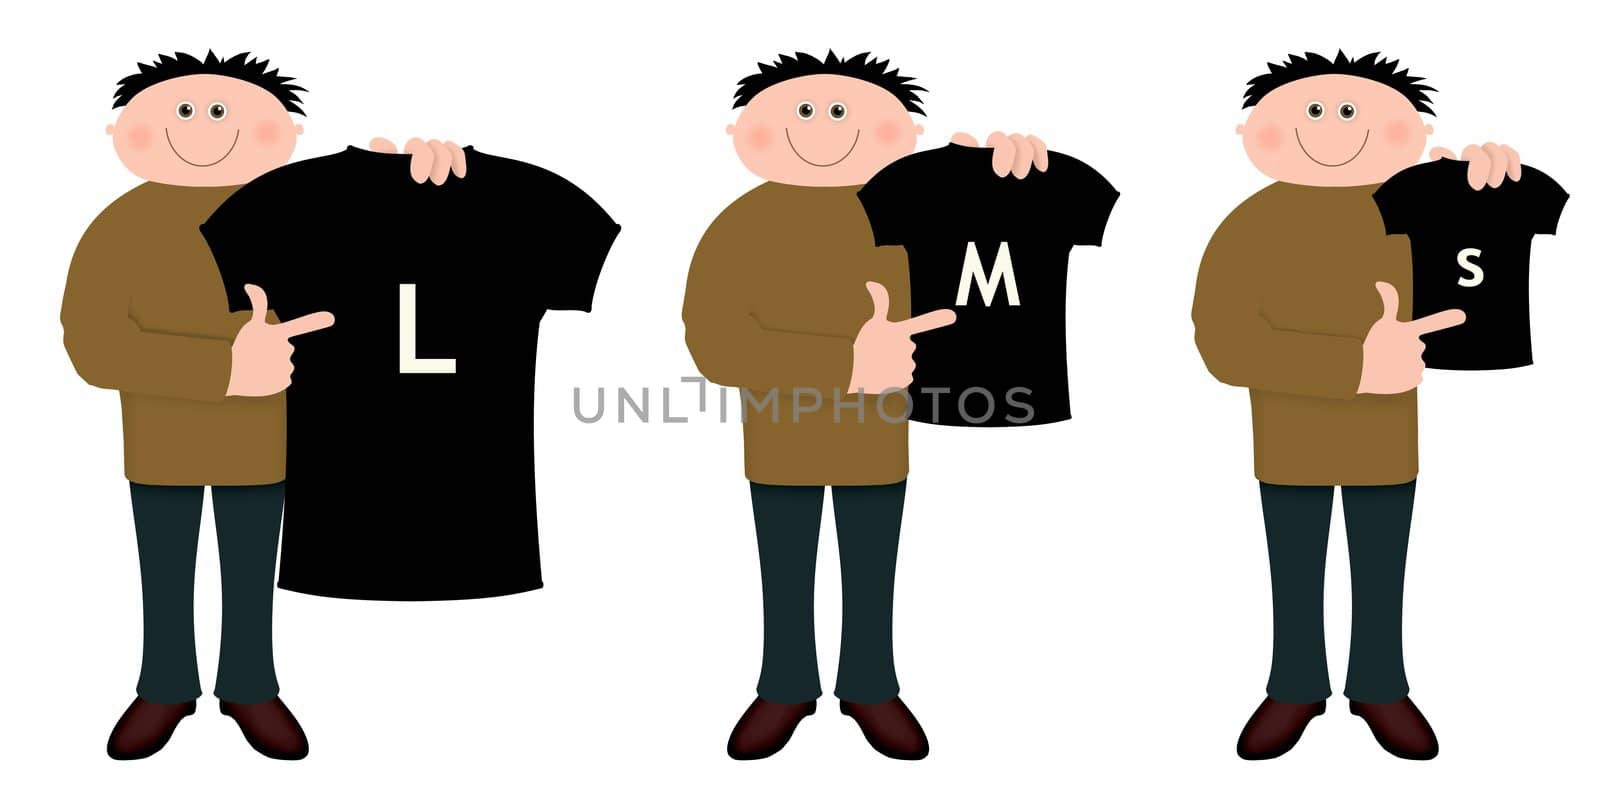 Illustration of a cartoon character holding three sizes of shirts